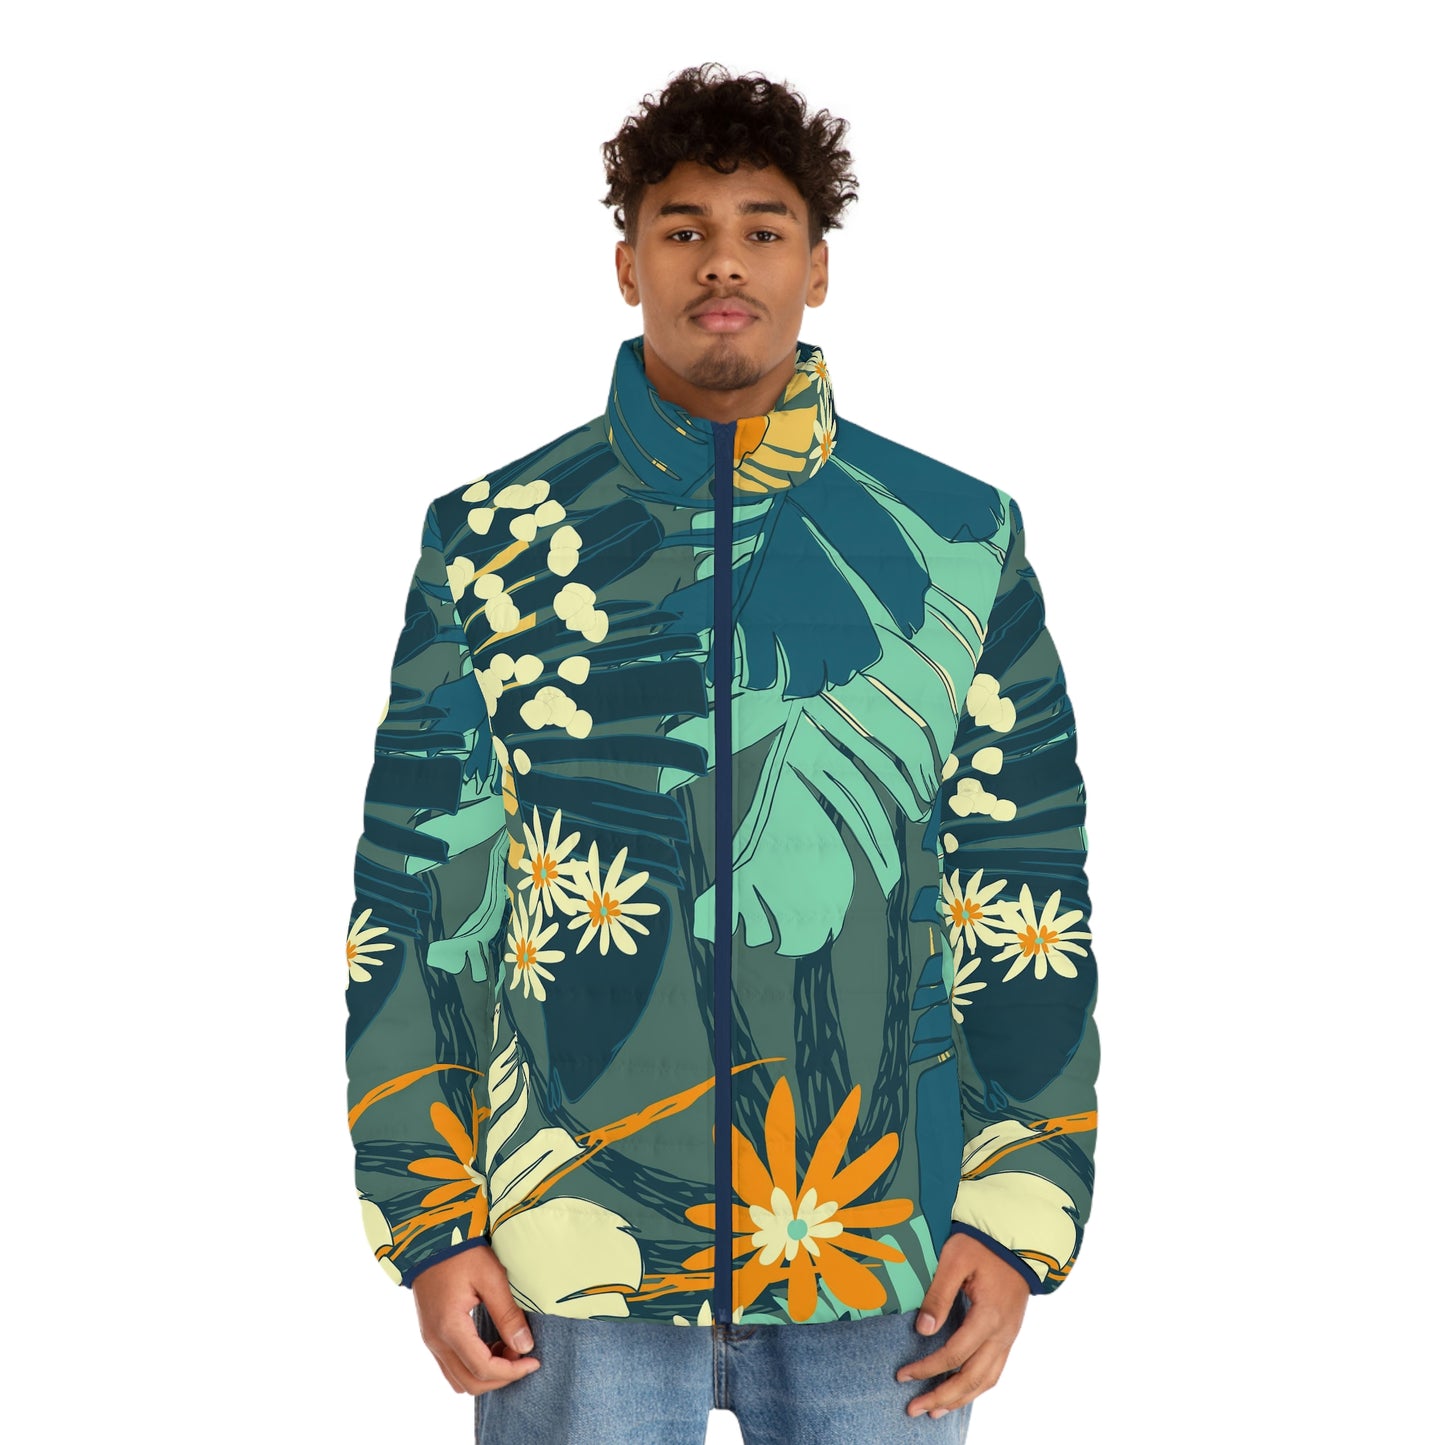 Unisex Jungle Blues, Tropical Print Puffer Jacket up to 2XL